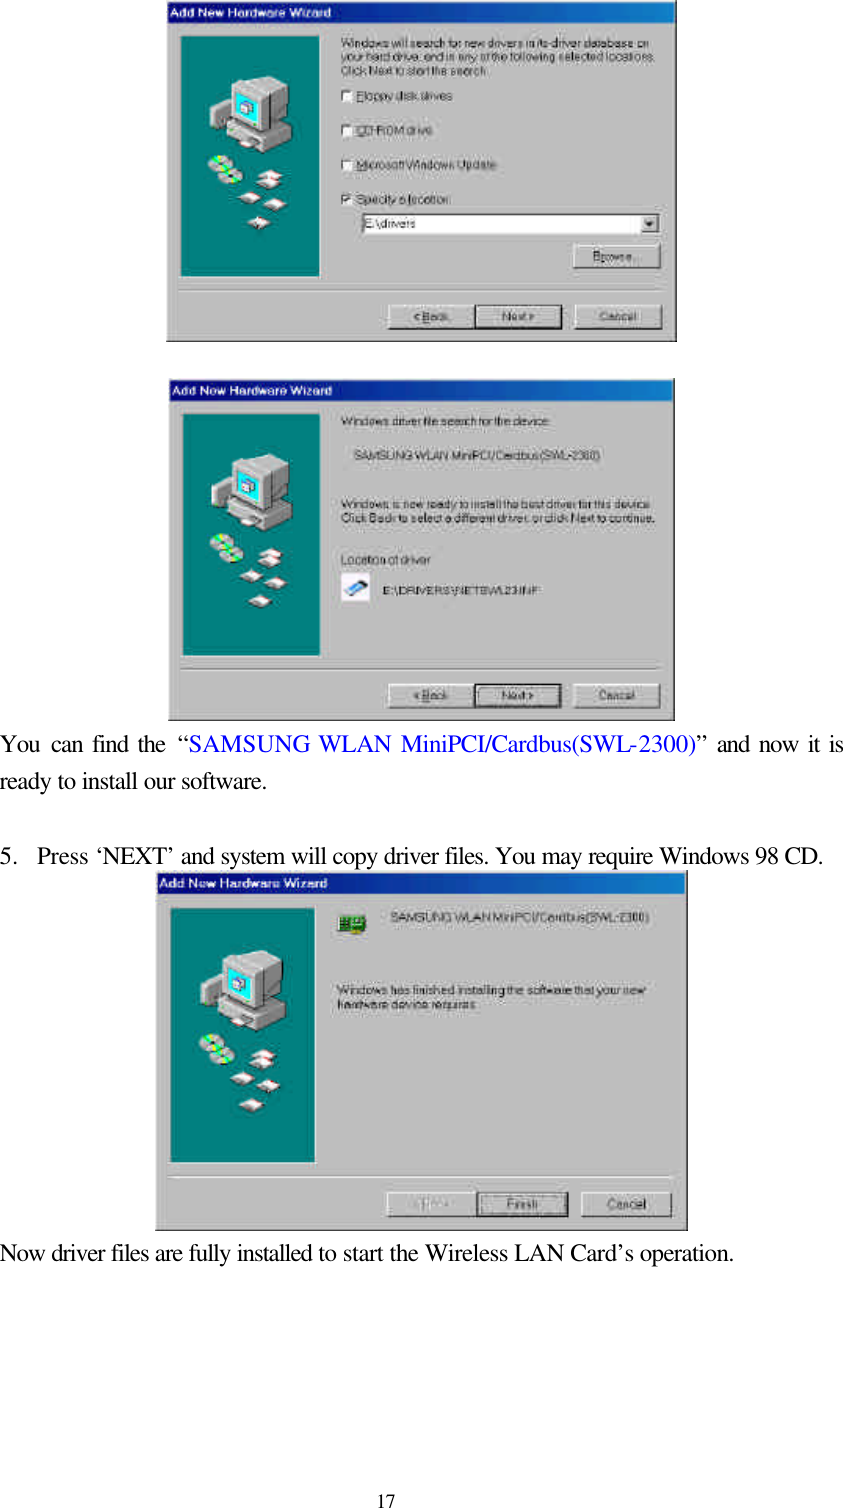  17   You  can find the “SAMSUNG WLAN MiniPCI/Cardbus(SWL-2300)” and now it is ready to install our software.   5.  Press ‘NEXT’ and system will copy driver files. You may require Windows 98 CD.  Now driver files are fully installed to start the Wireless LAN Card’s operation.     